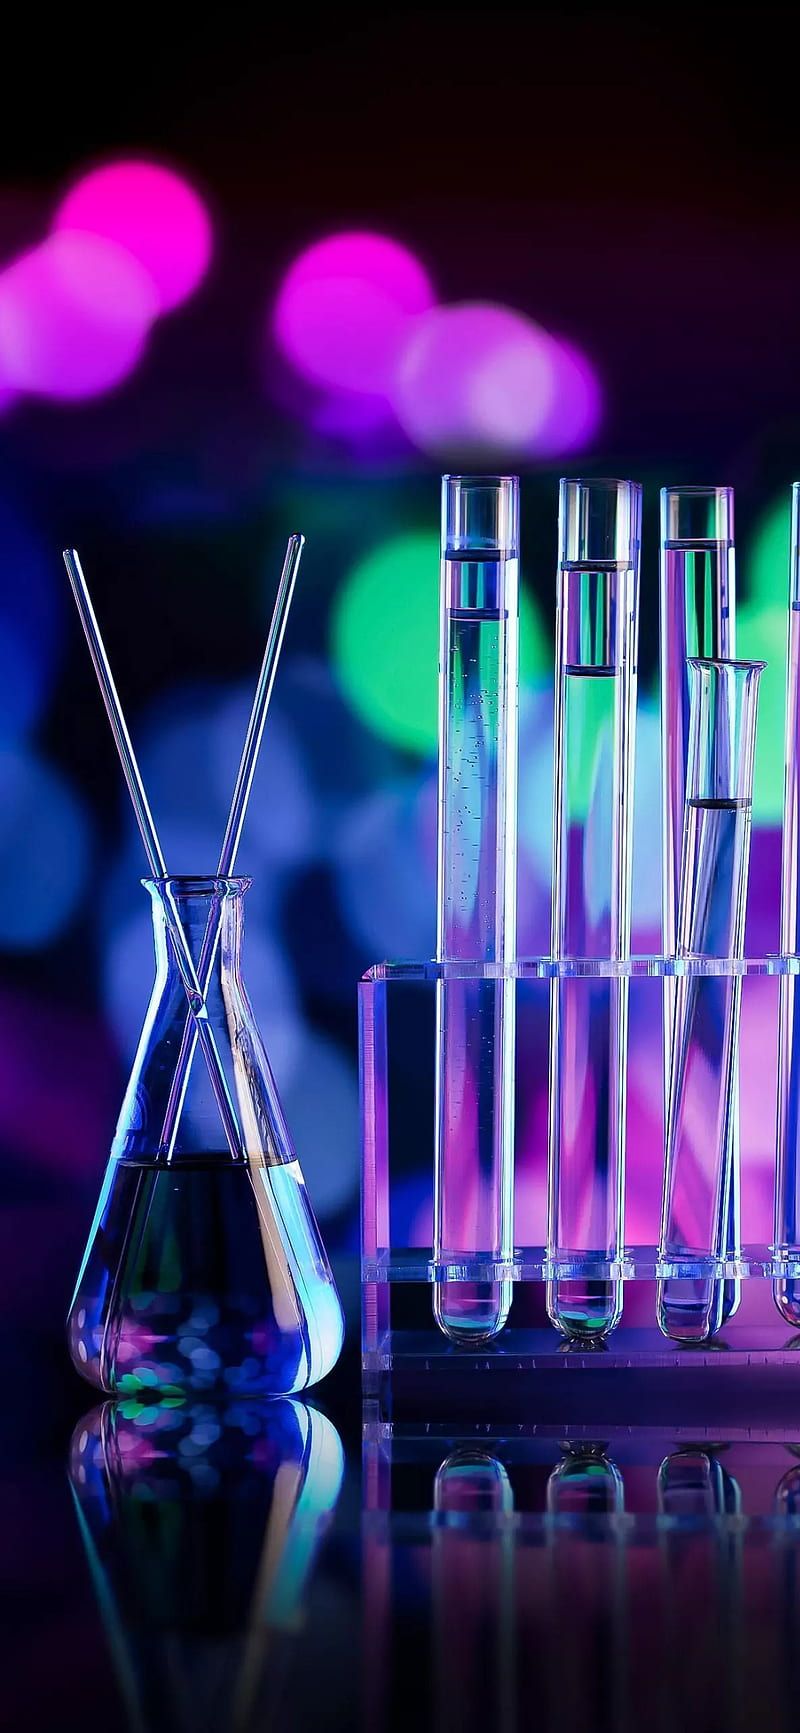 A collection of test tubes and beakers with a purple and blue background - Chemistry